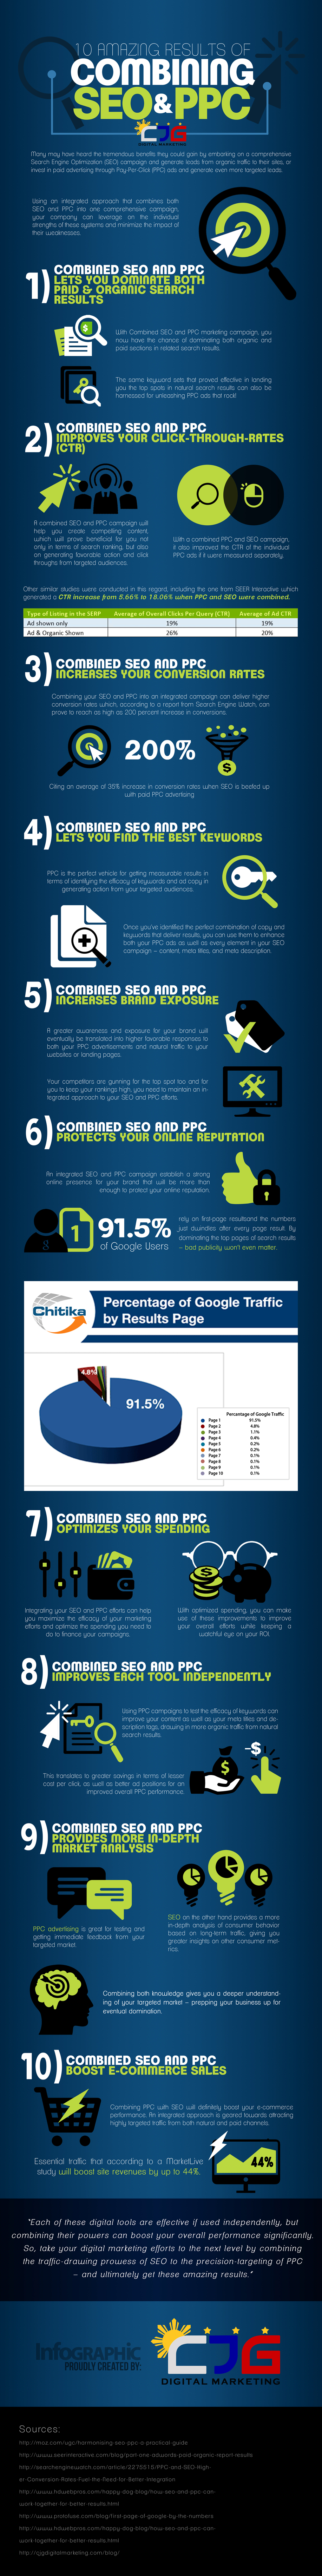 Advantages of Combined SEO and PPC Strategy [Inforgraphic]